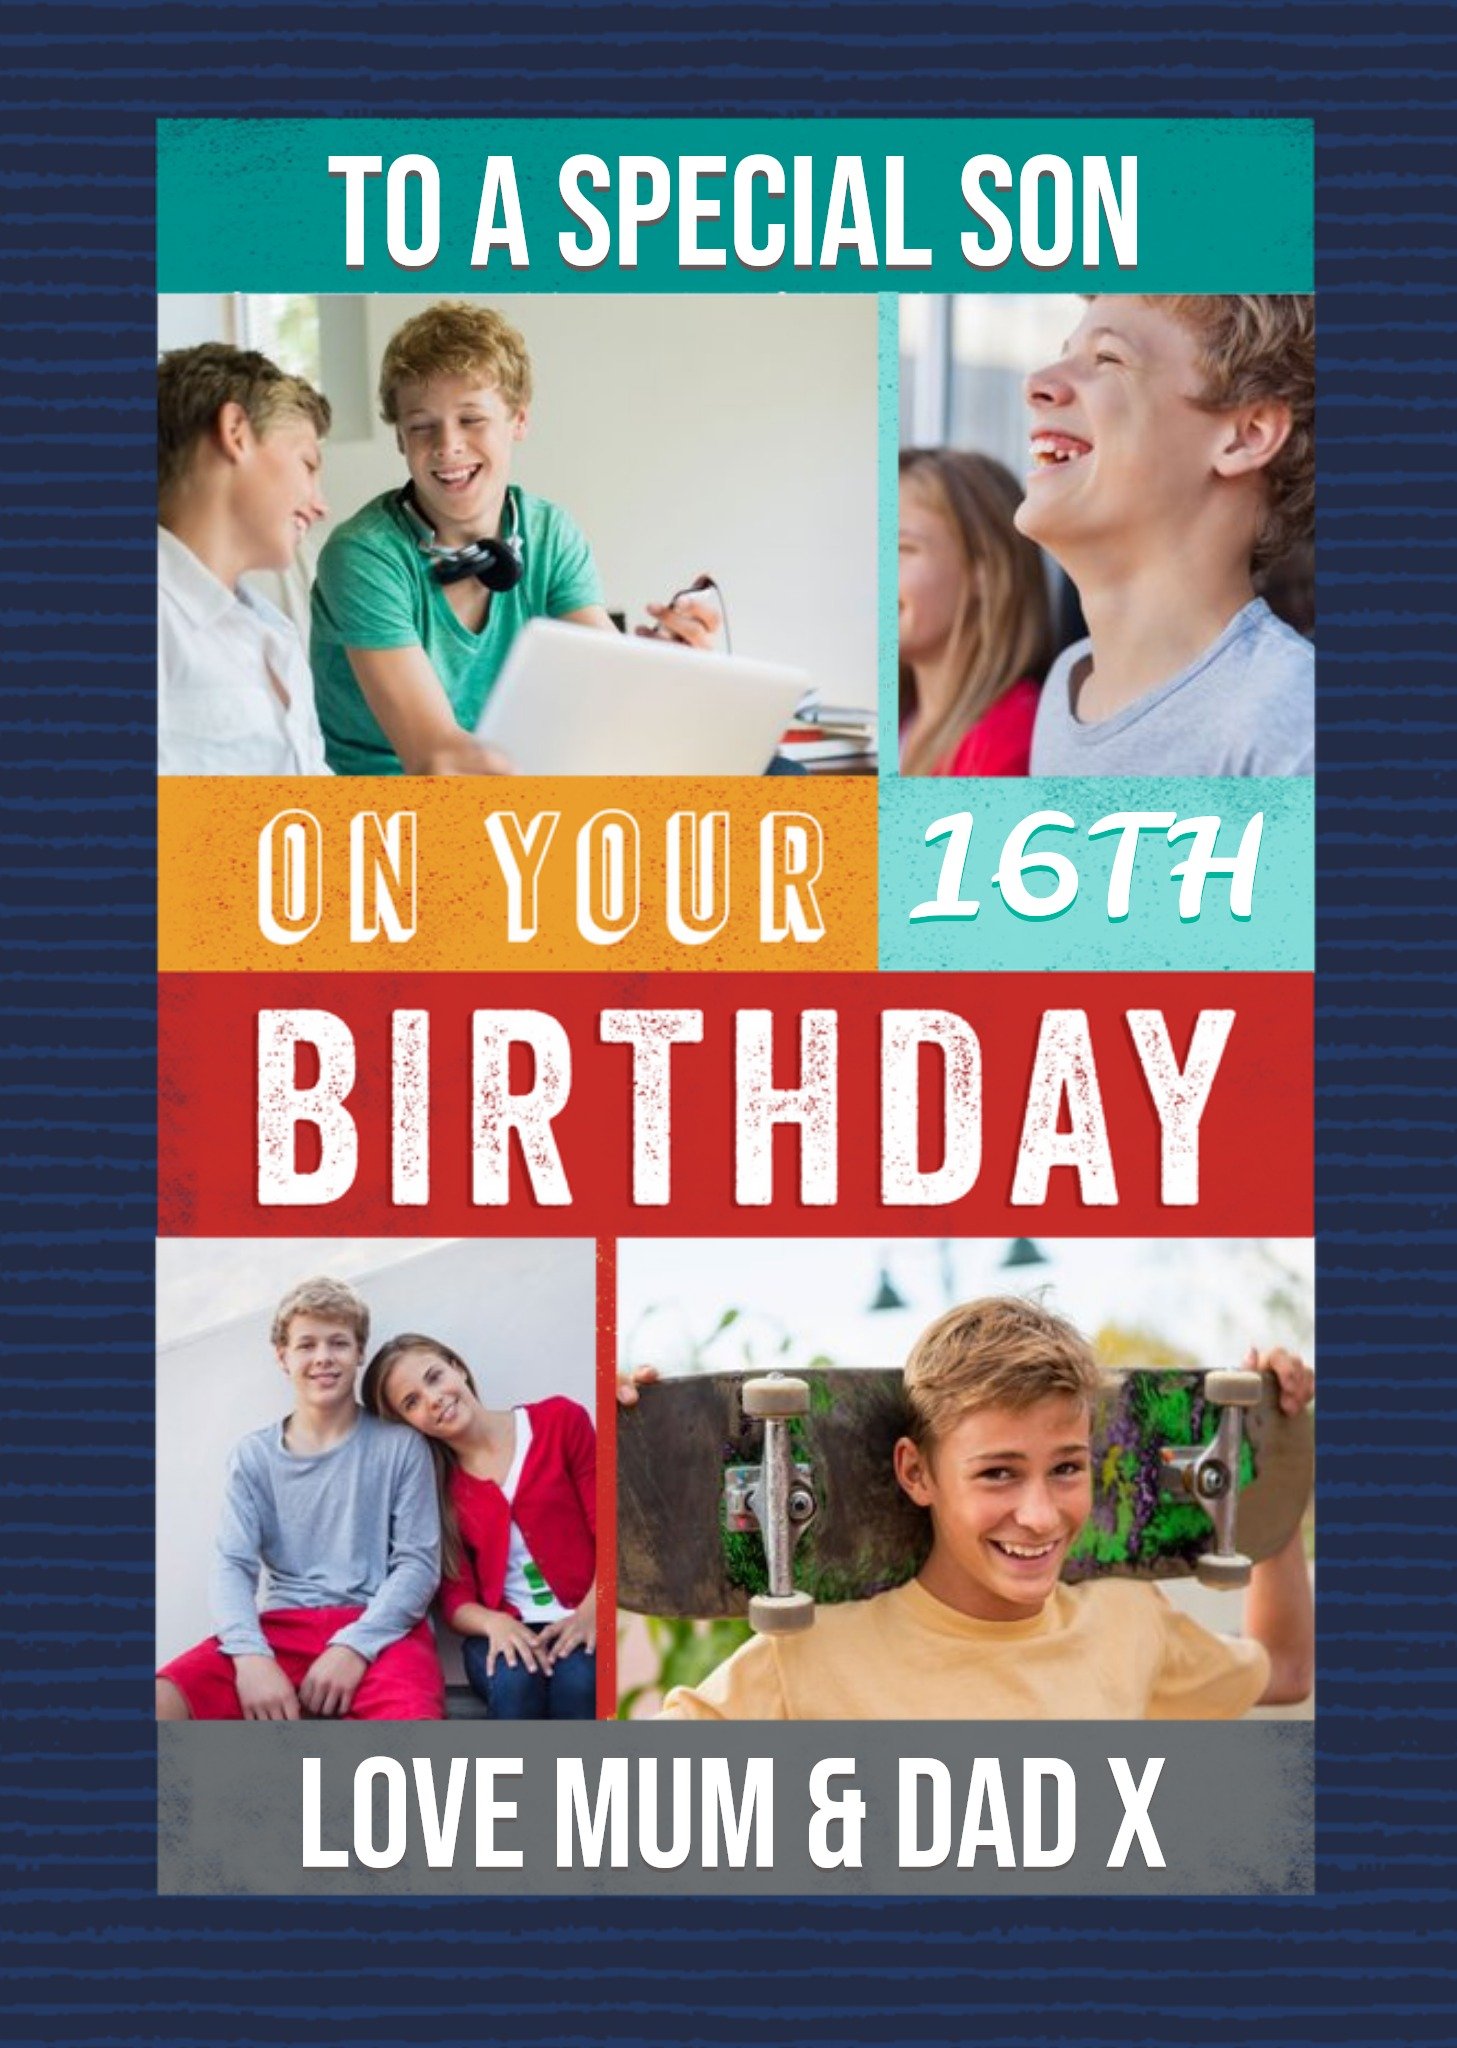 Moonpig To My Son On Your 16th Birthday Photo Upload Birthday Card, Large